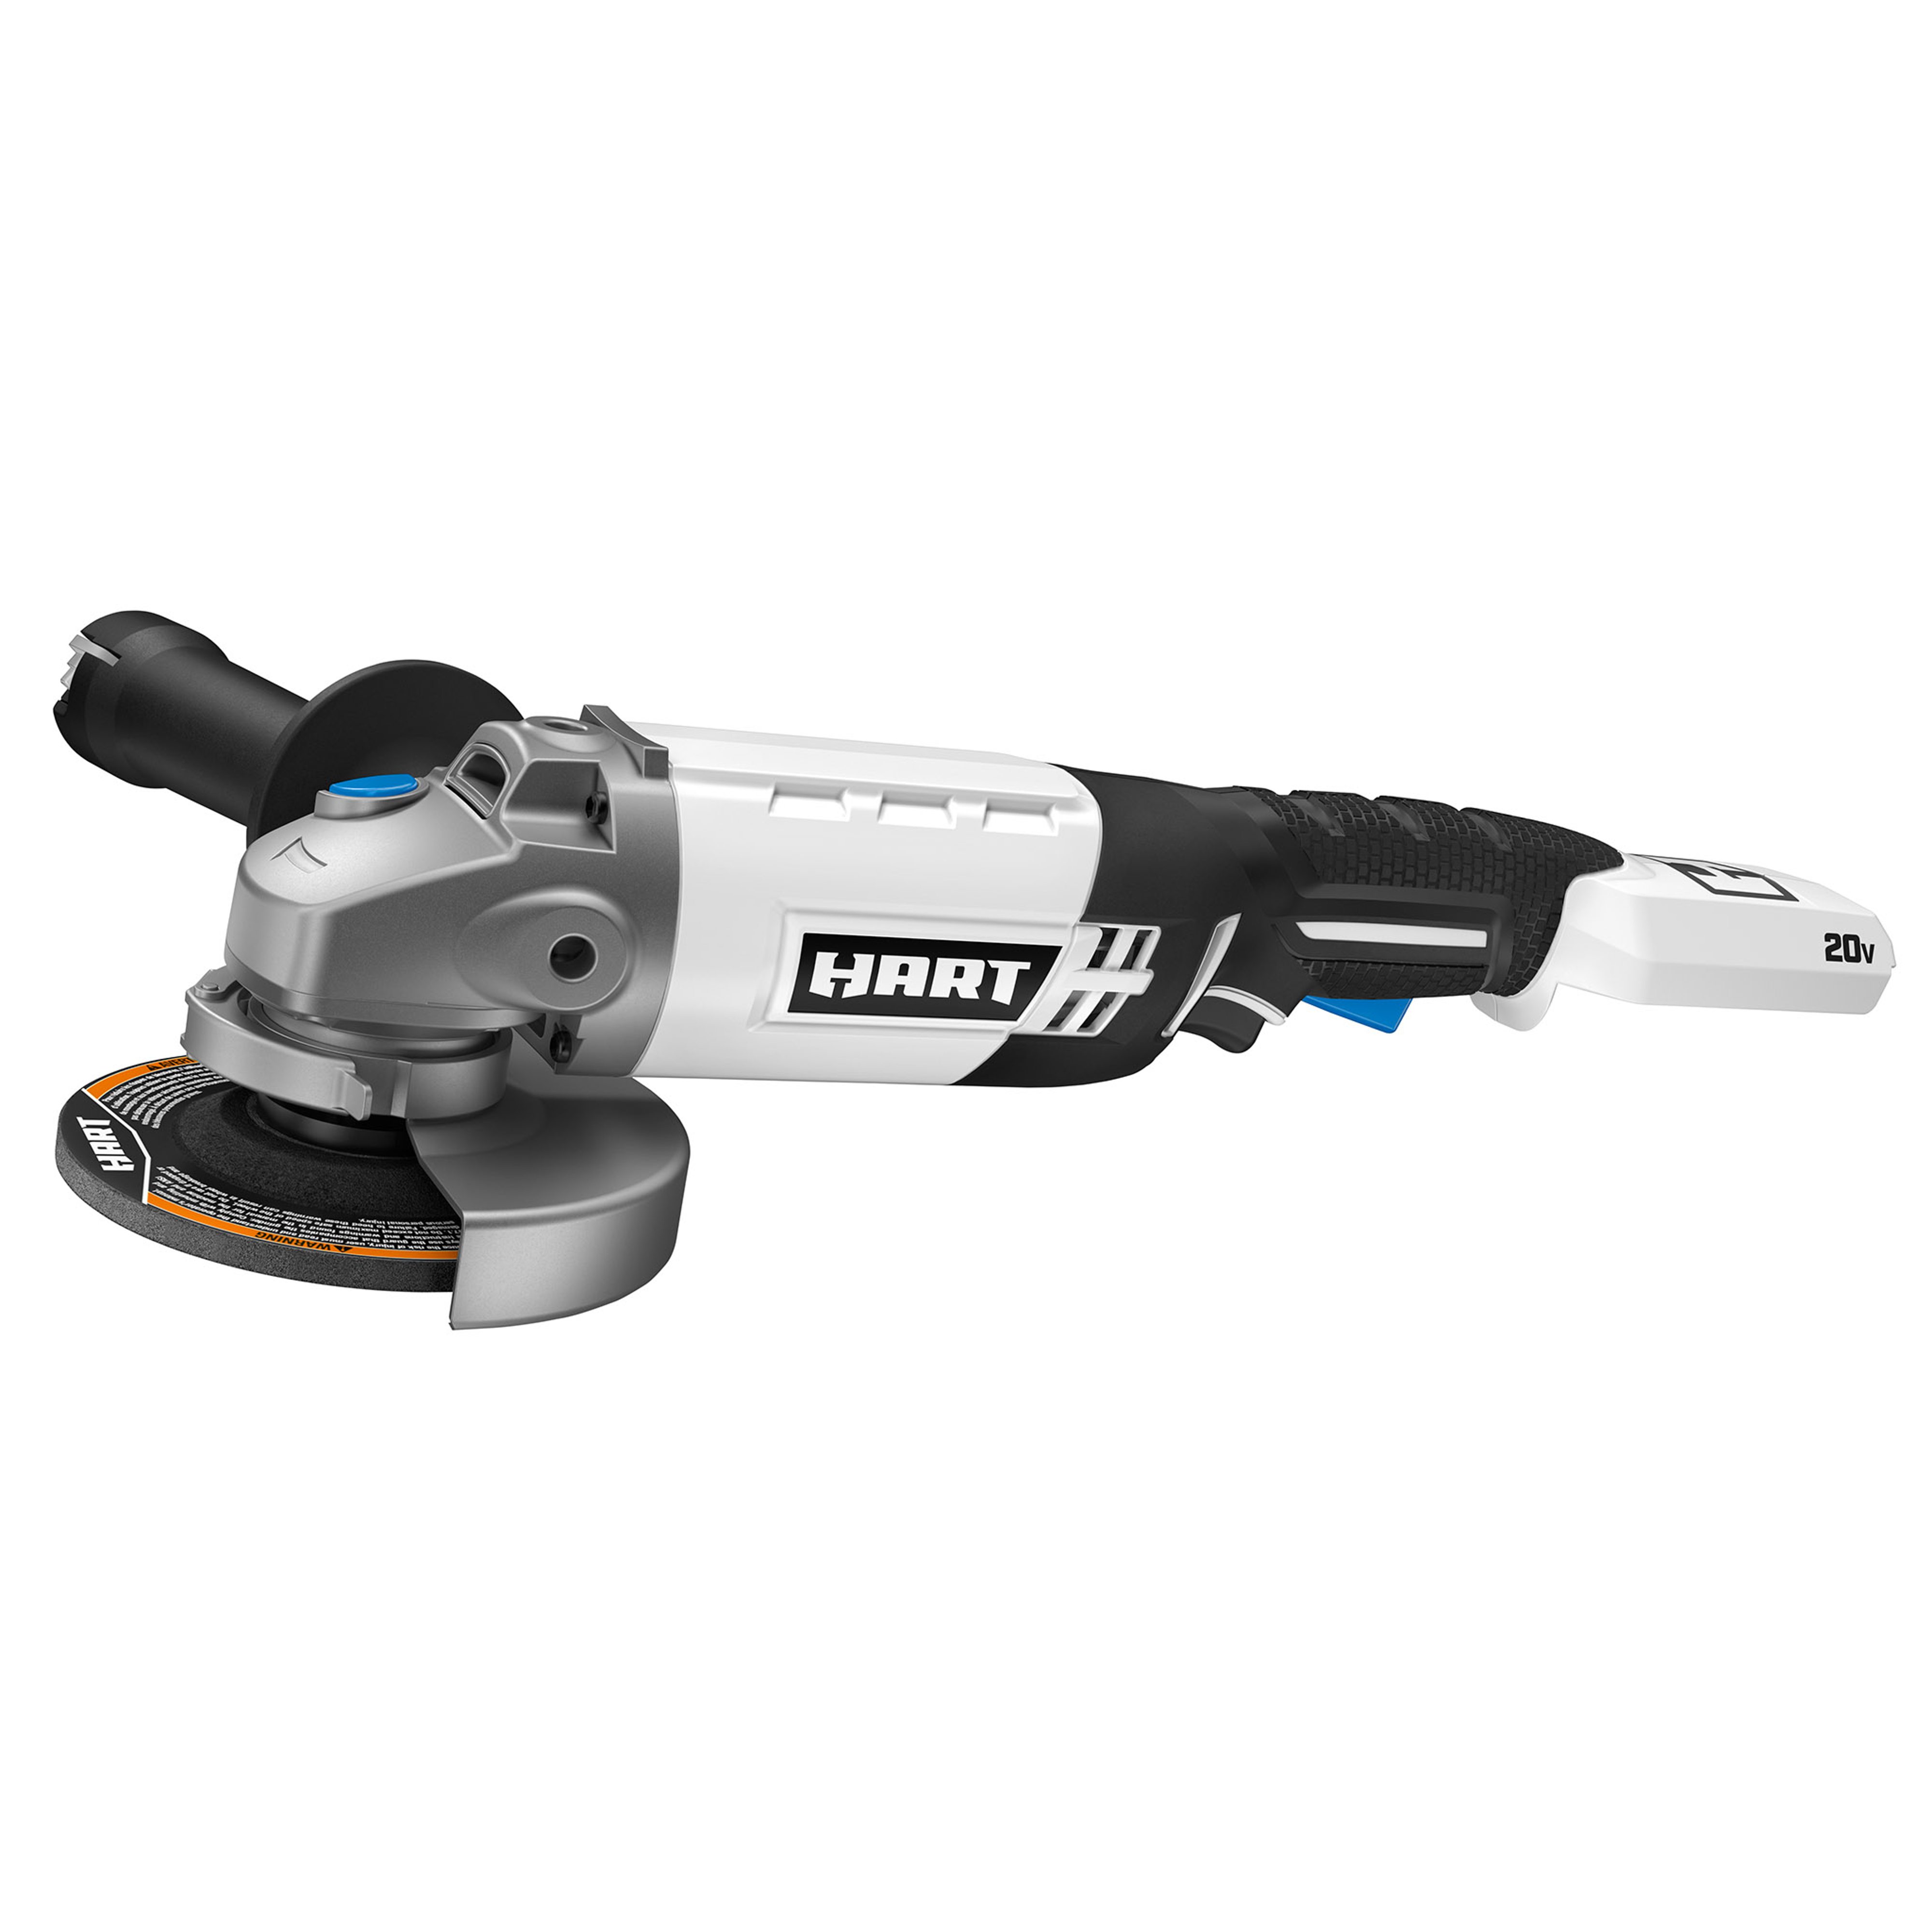 HART 20-Volt Cordless 4 1/2-inch Angle Grinder (Battery Not Included) - image 1 of 11